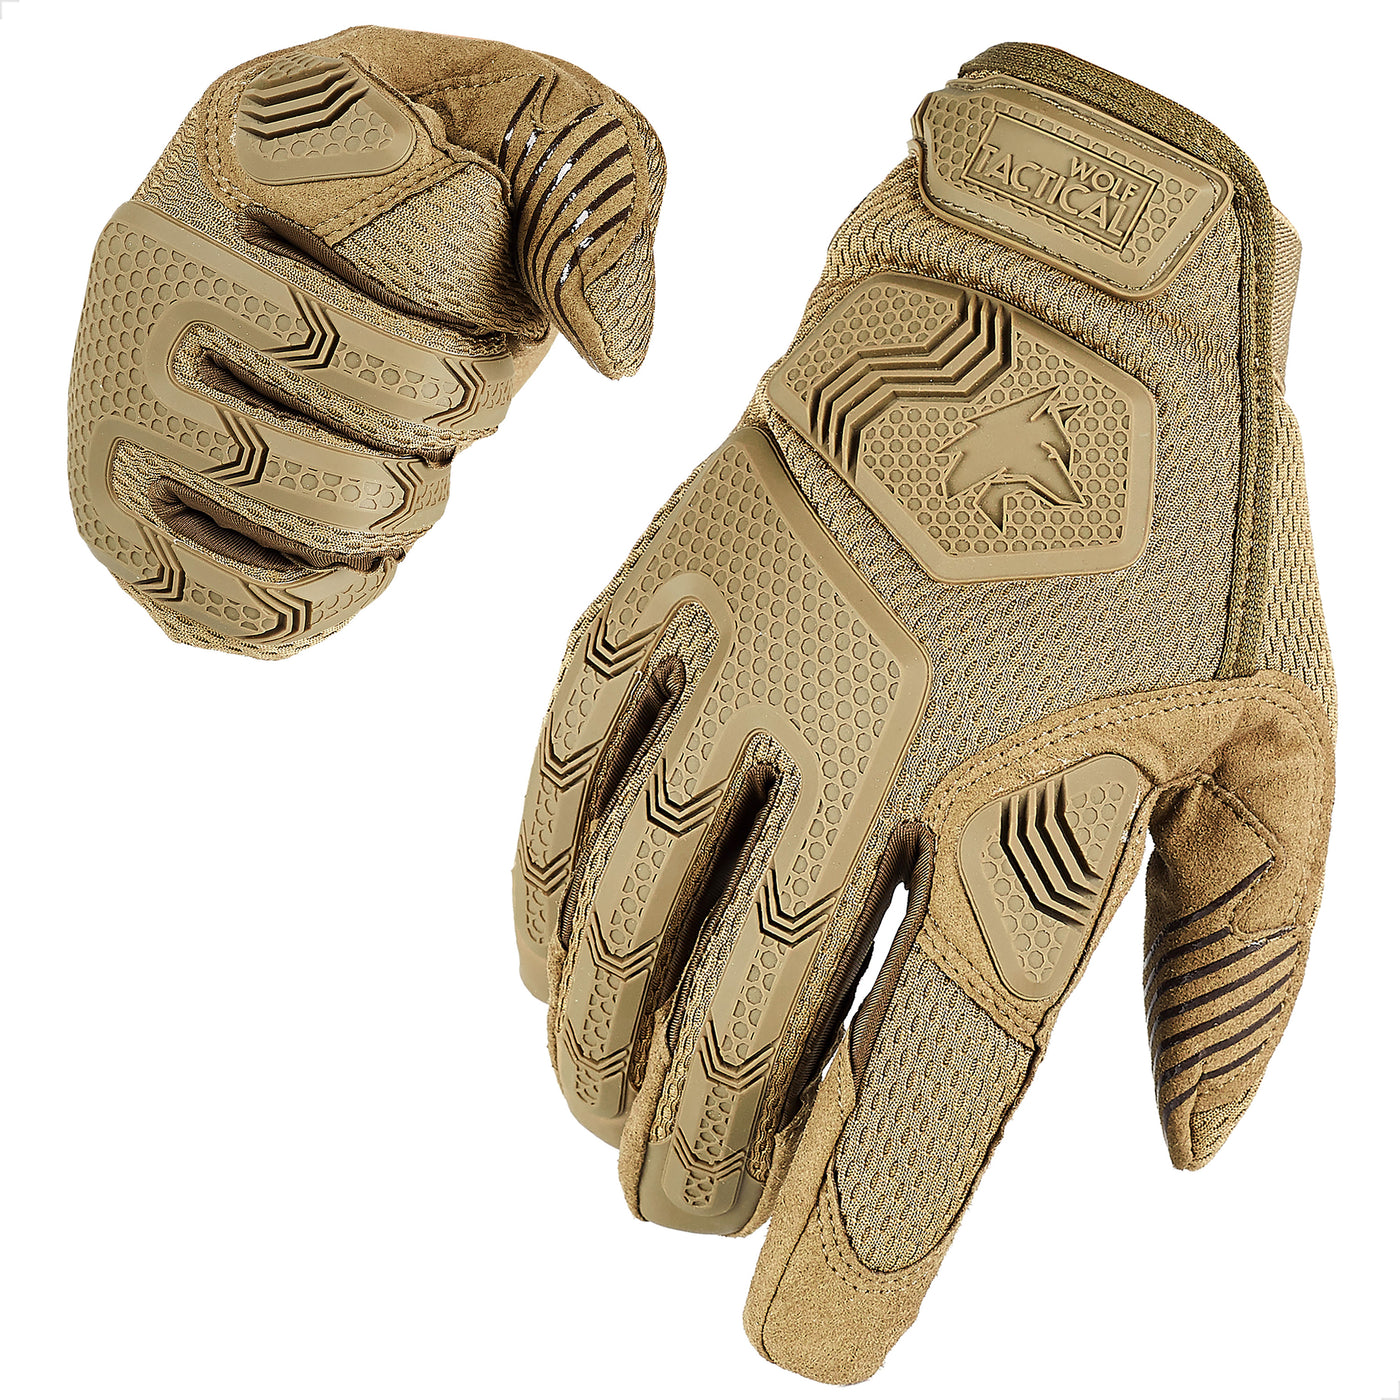 Tactical Shooting Gloves